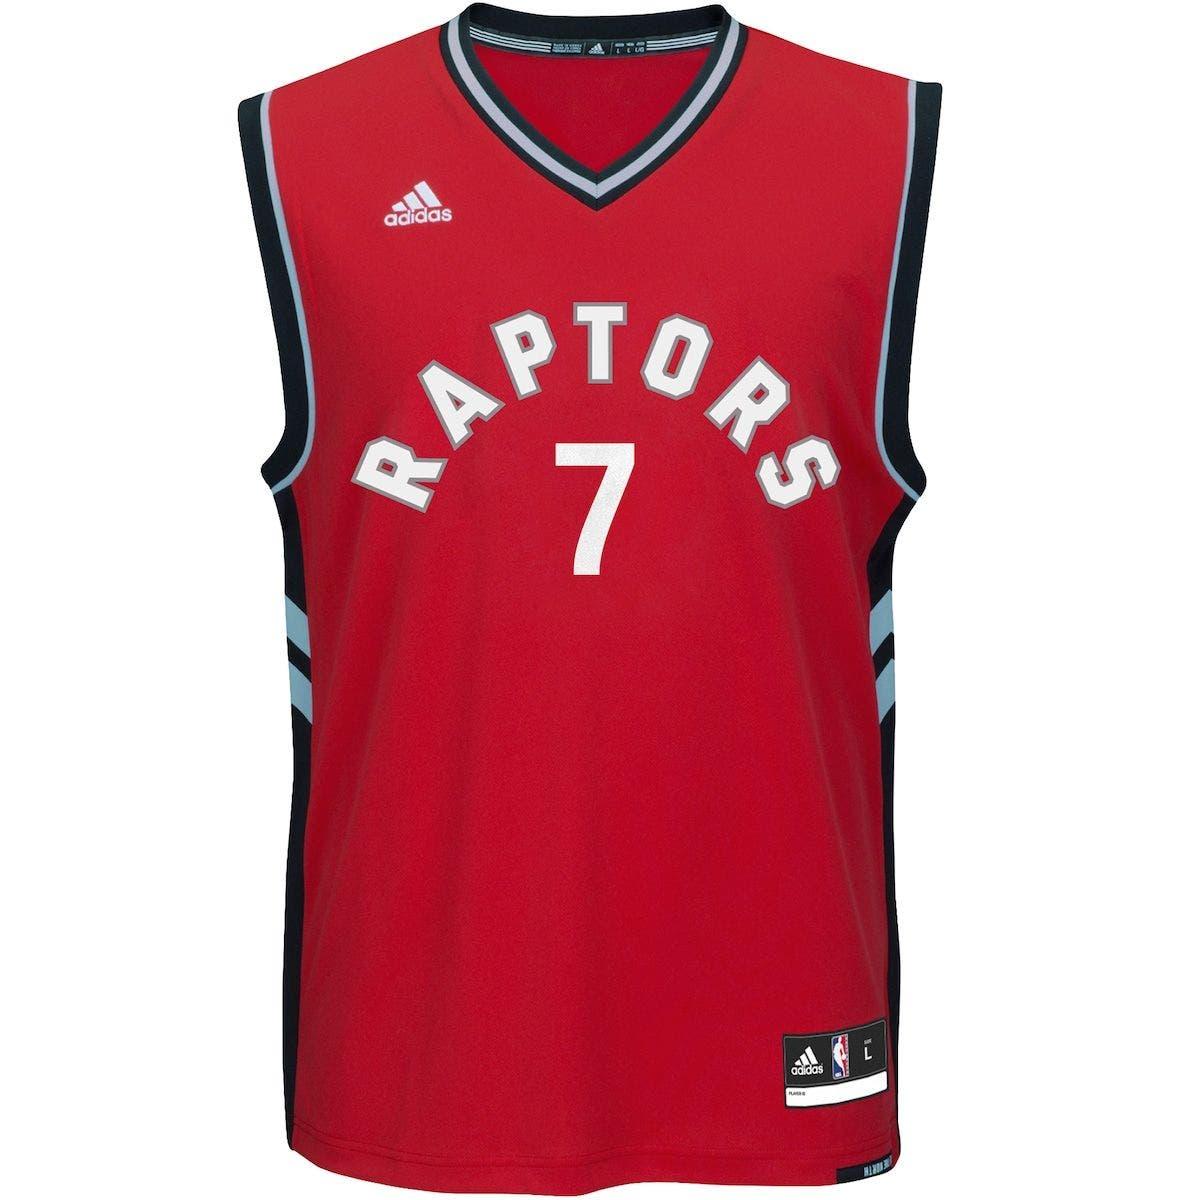 Kyle Lowry Clothing for Sale